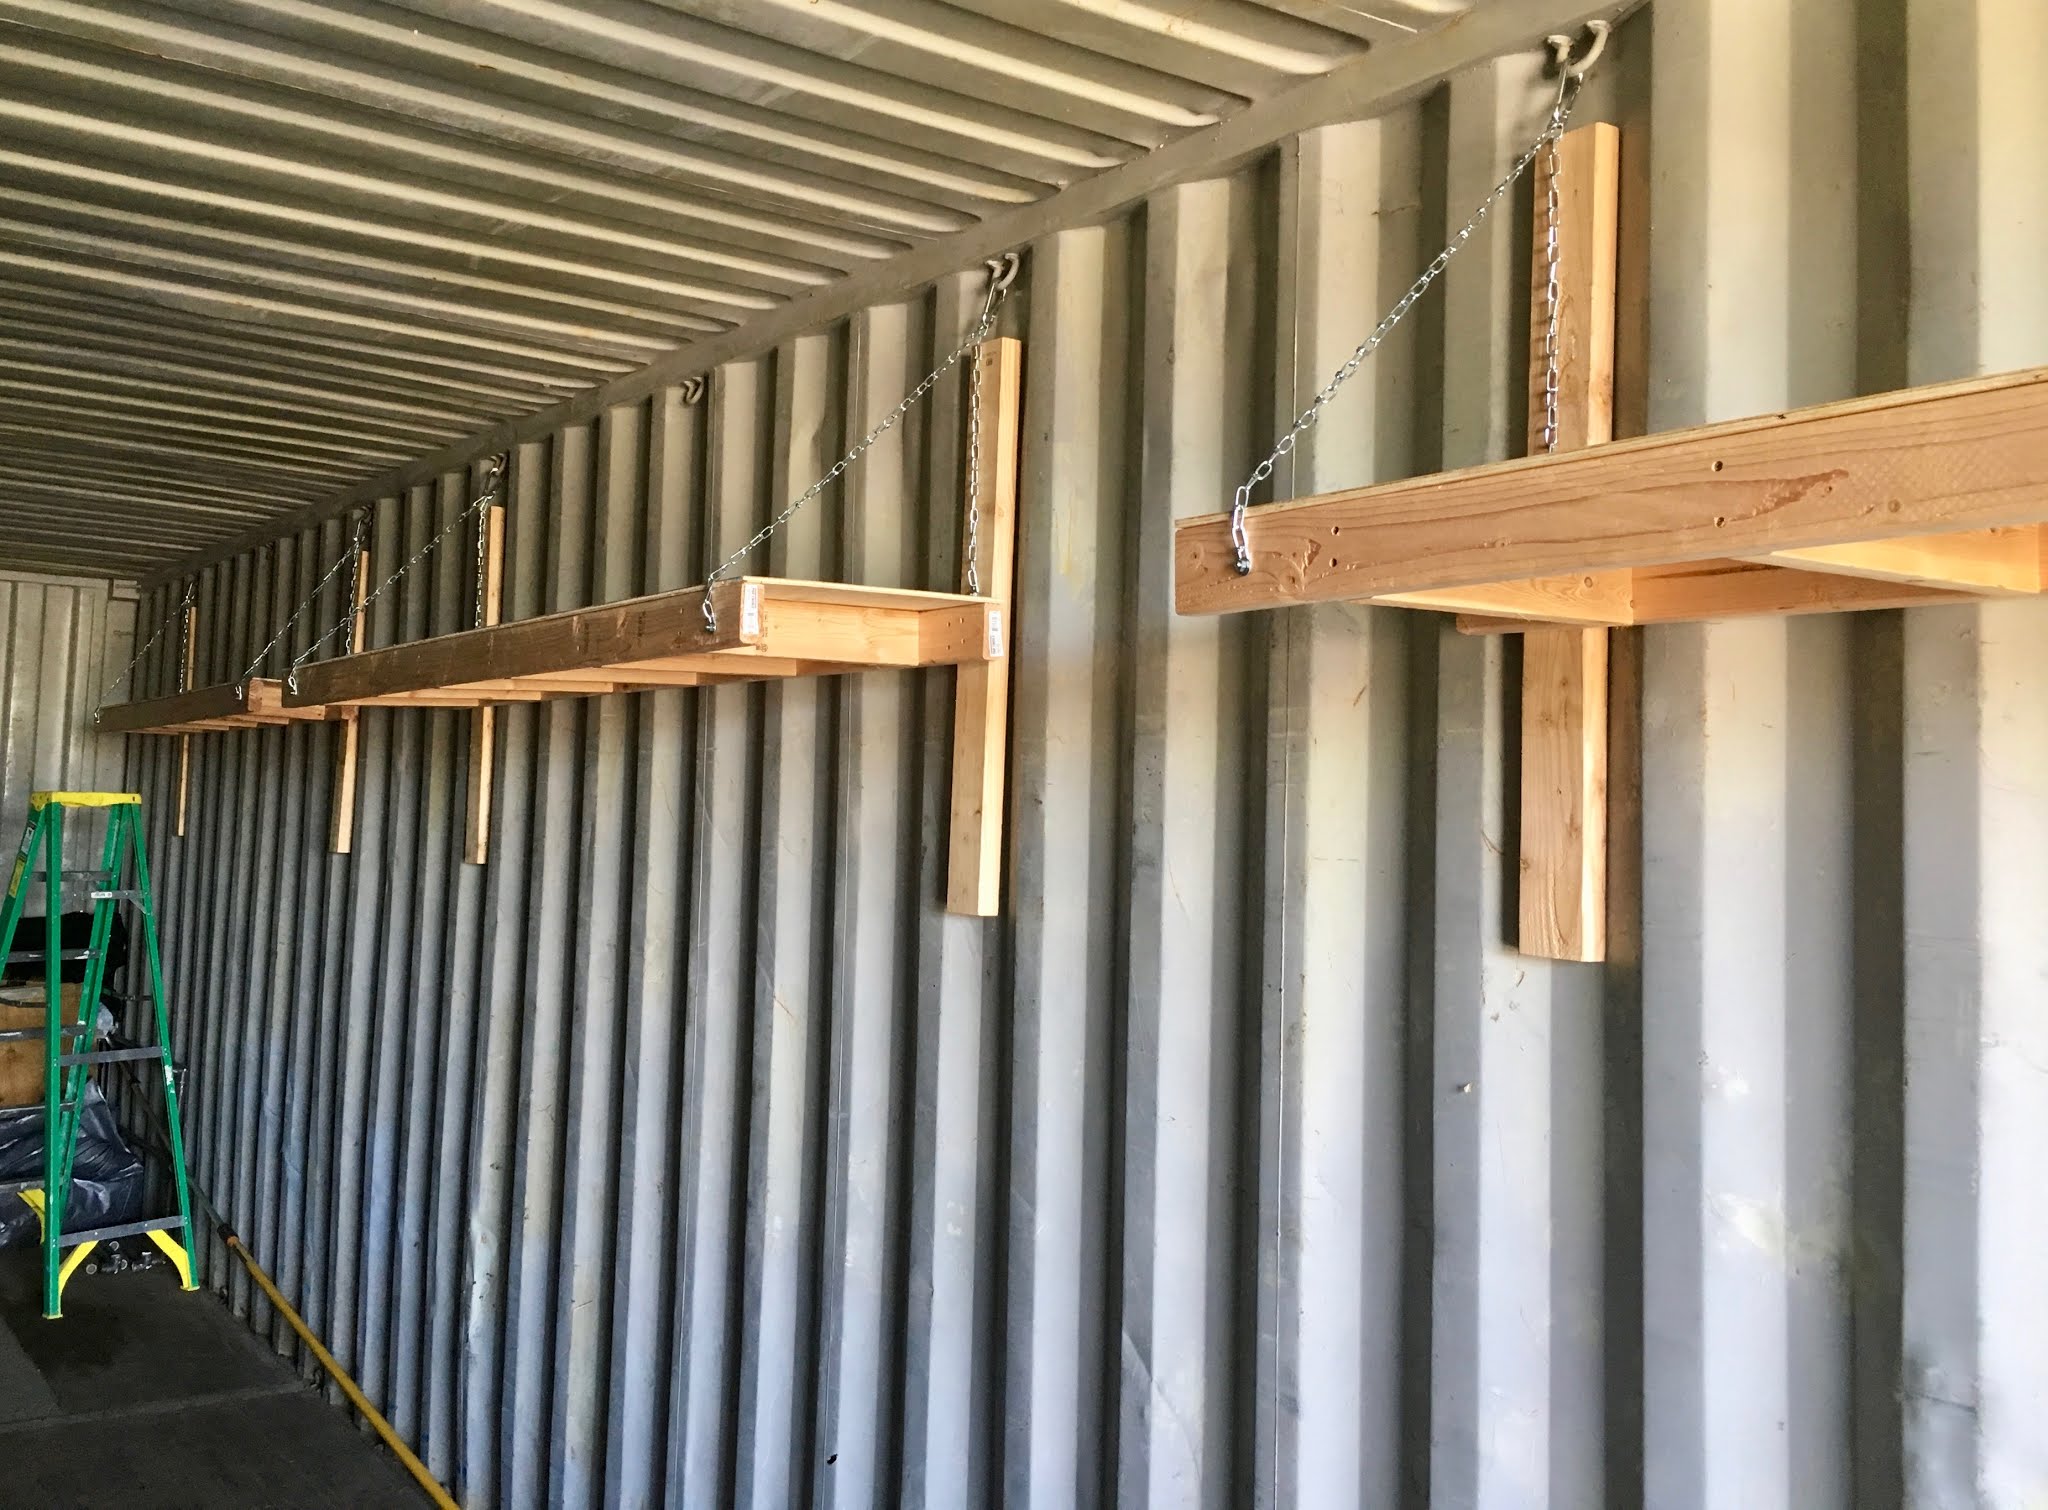 Shipping Container Hanging Shelves (and my recycling system)